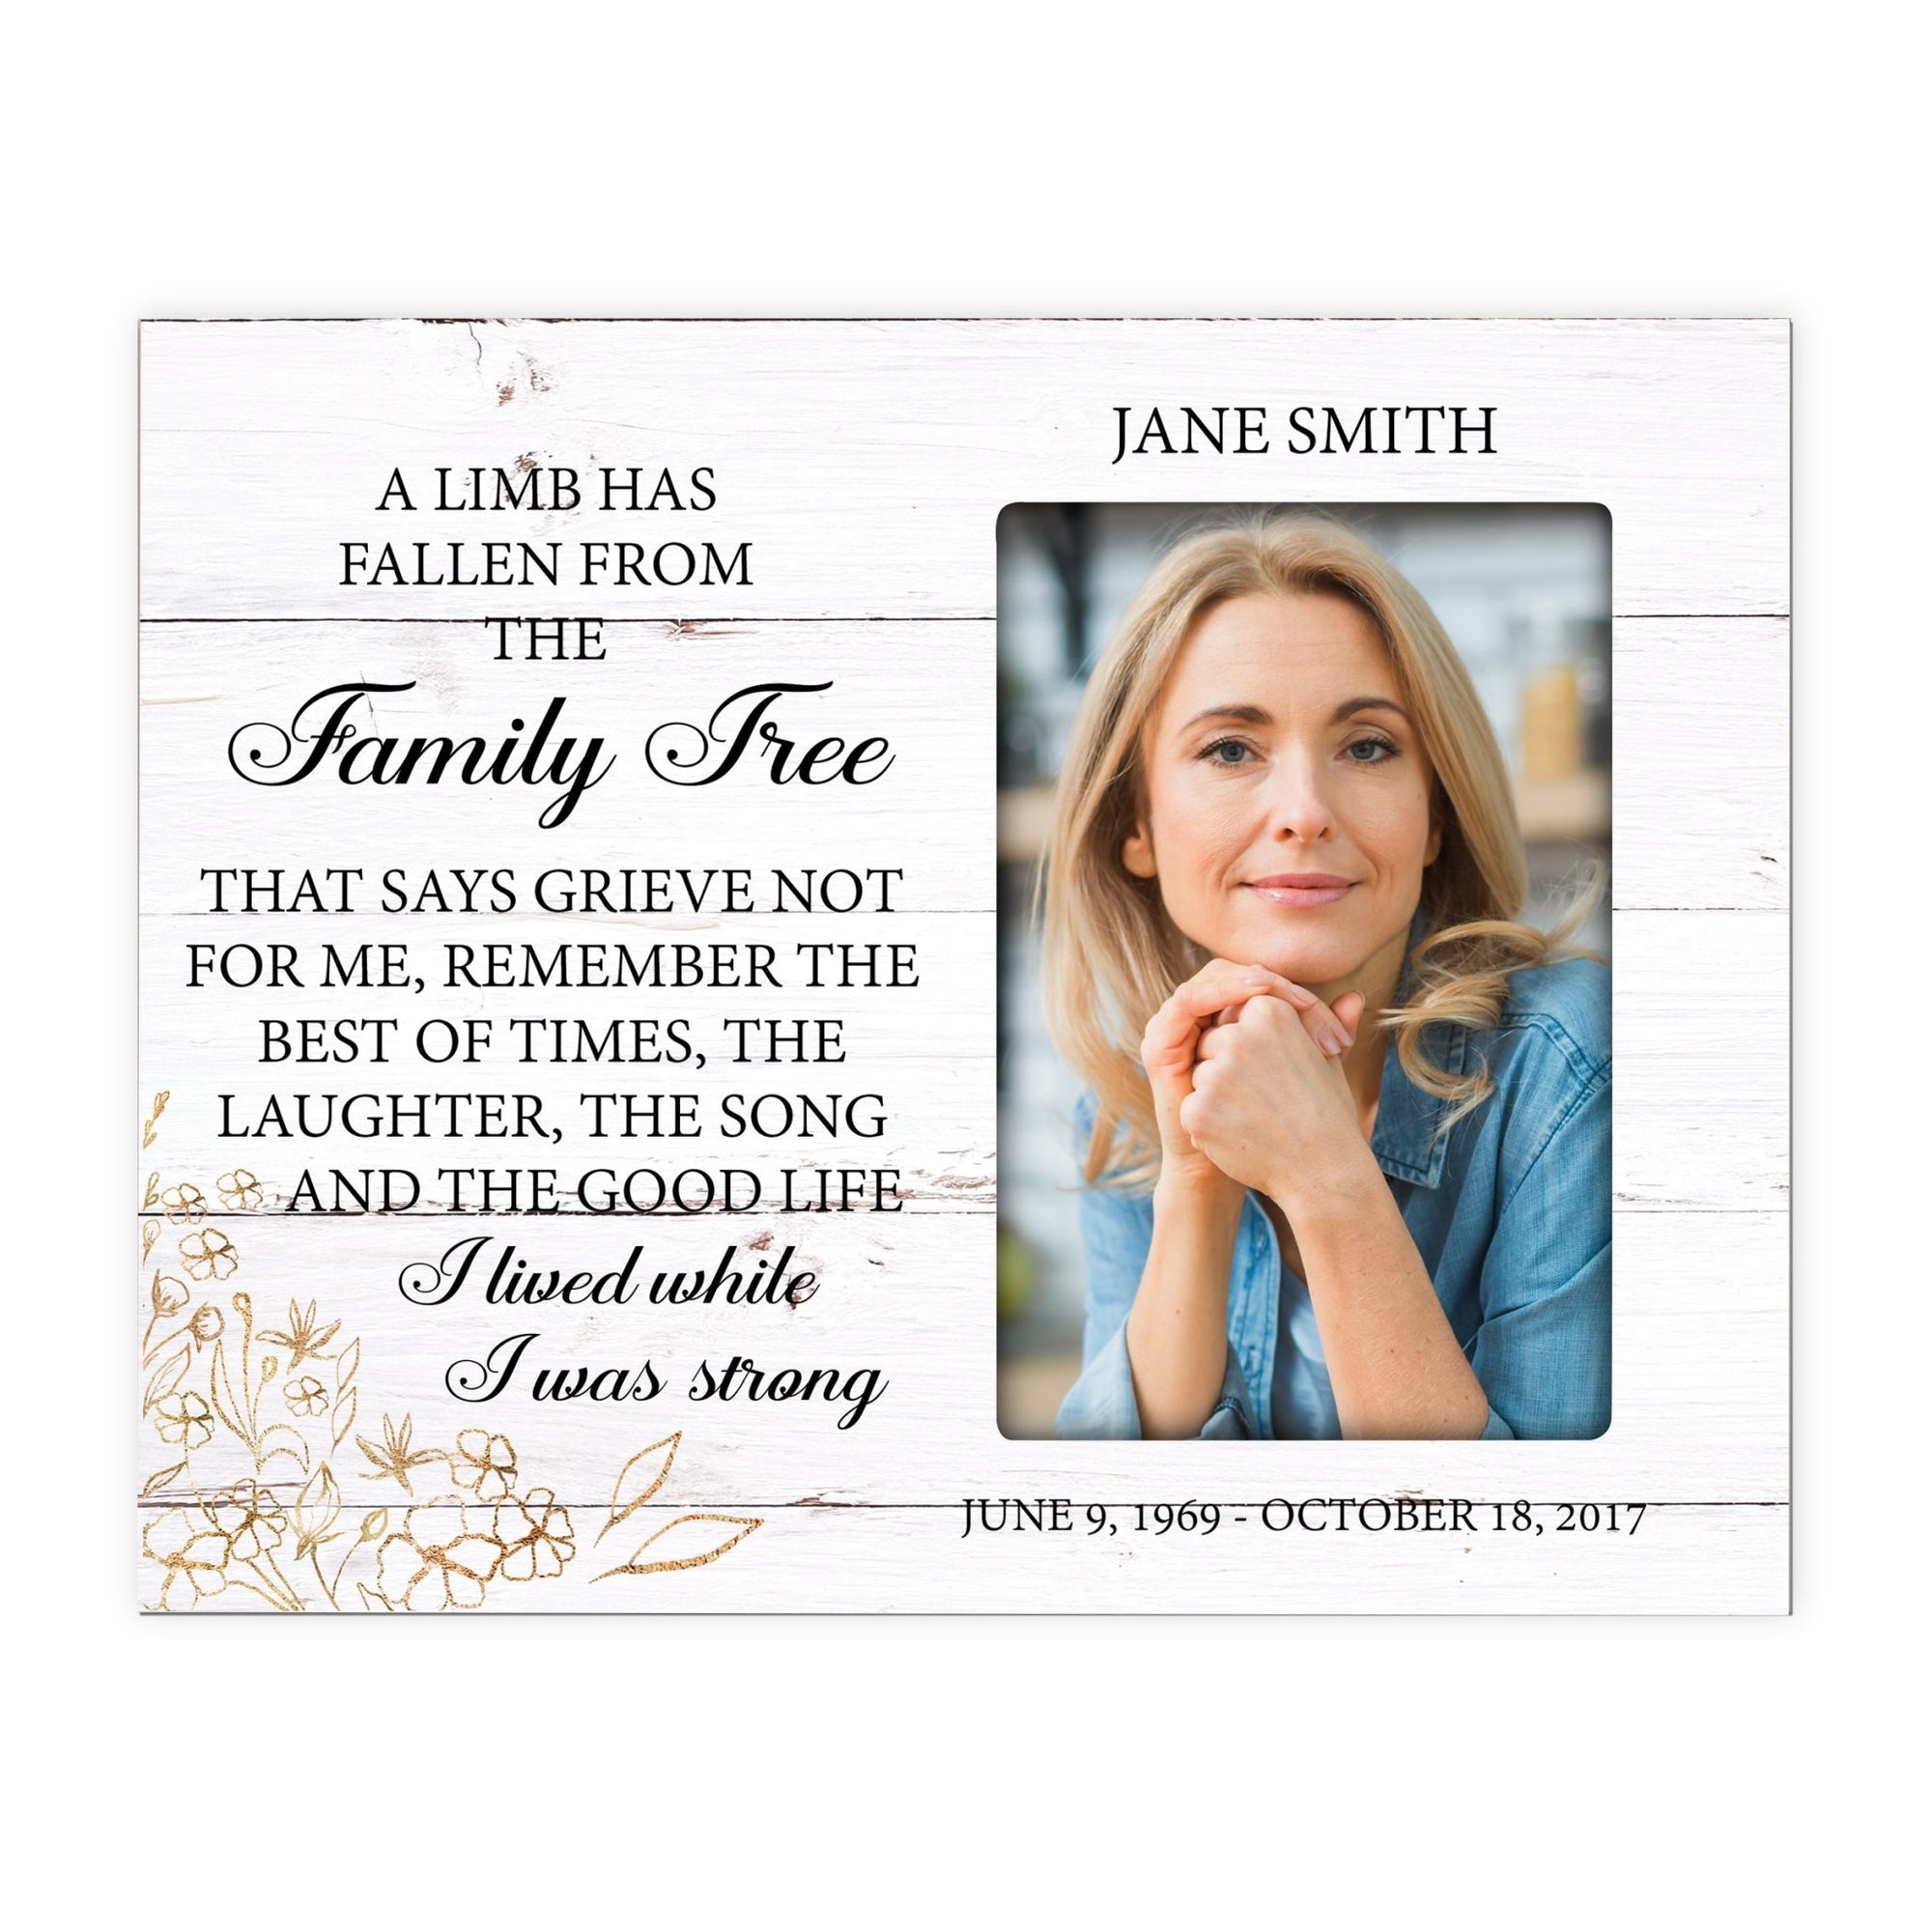 Personalized Horizontal 8x10 Wooden Memorial Picture Frame Holds 4x6 Photo - A Limb Has Fallen (White Distressed) - LifeSong Milestones